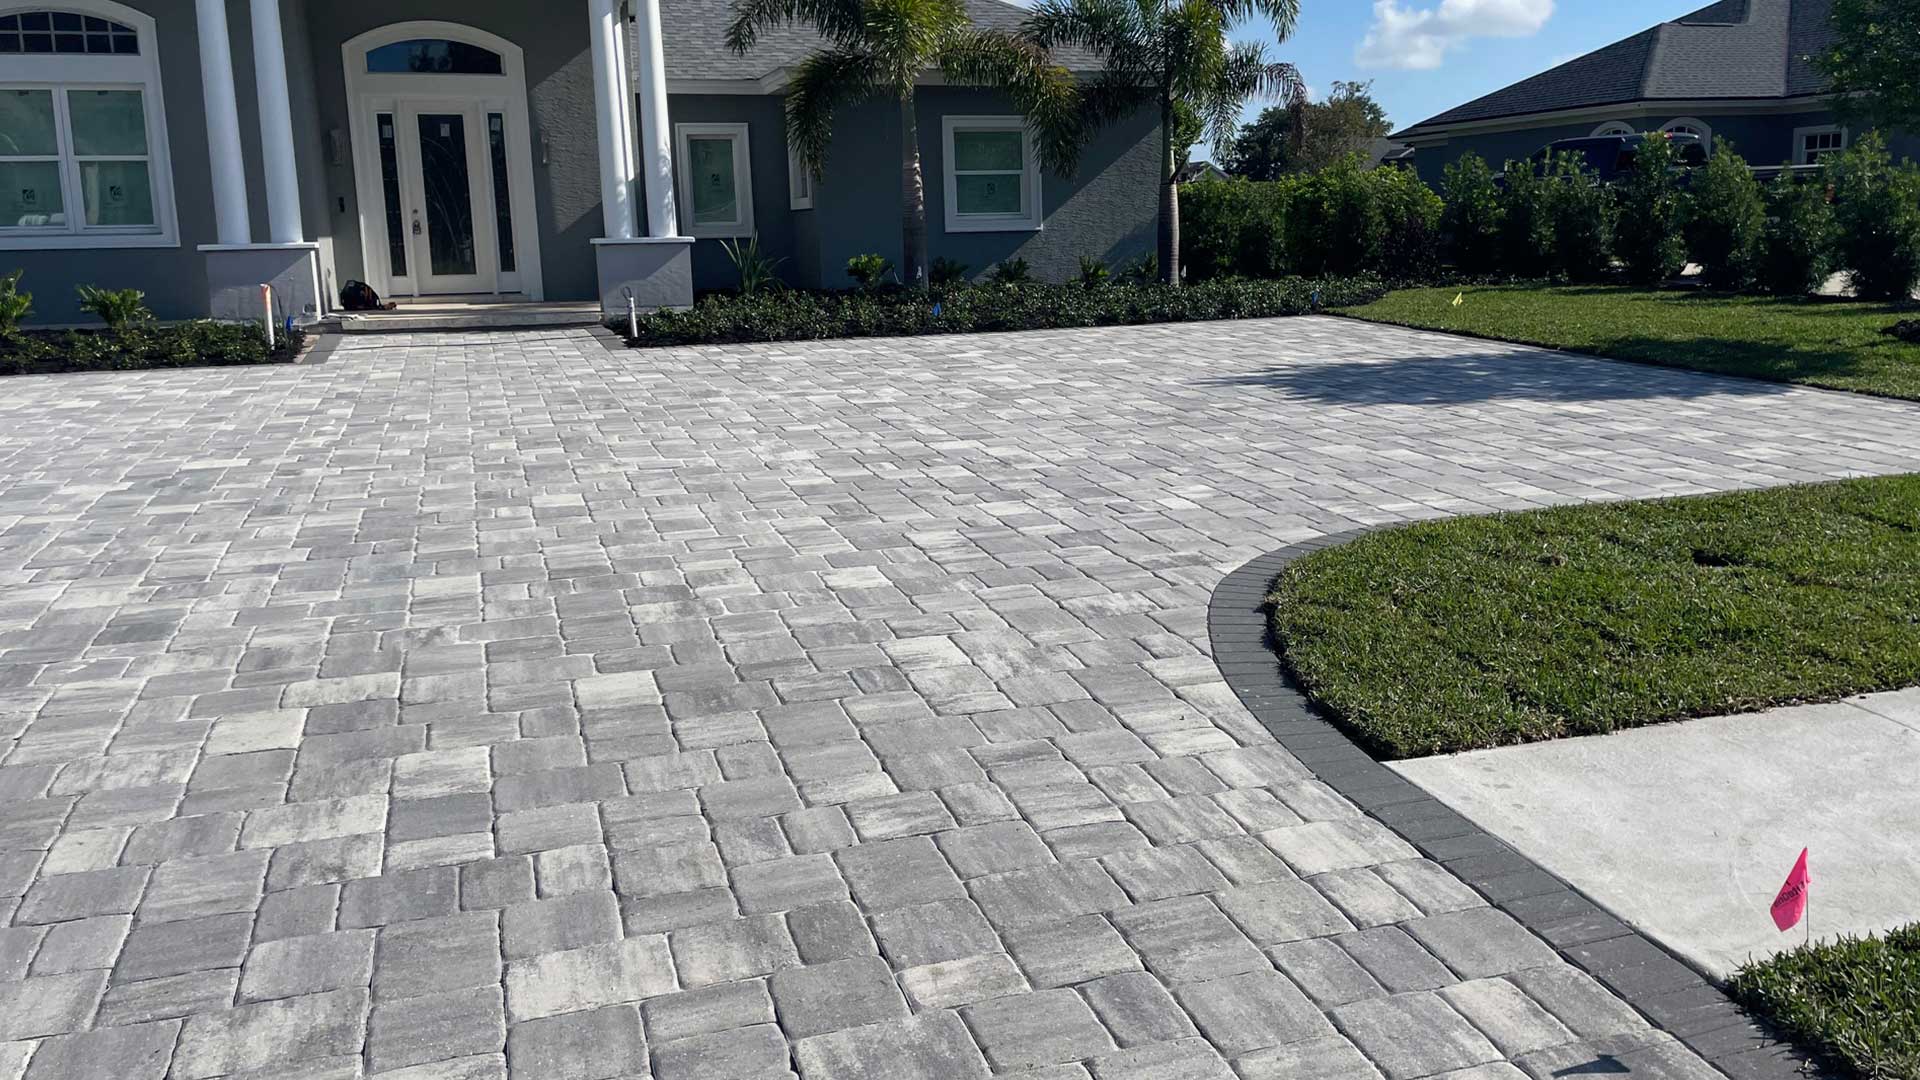 Custom gray paver patio and driveway at a residential property Lakeland, FL.